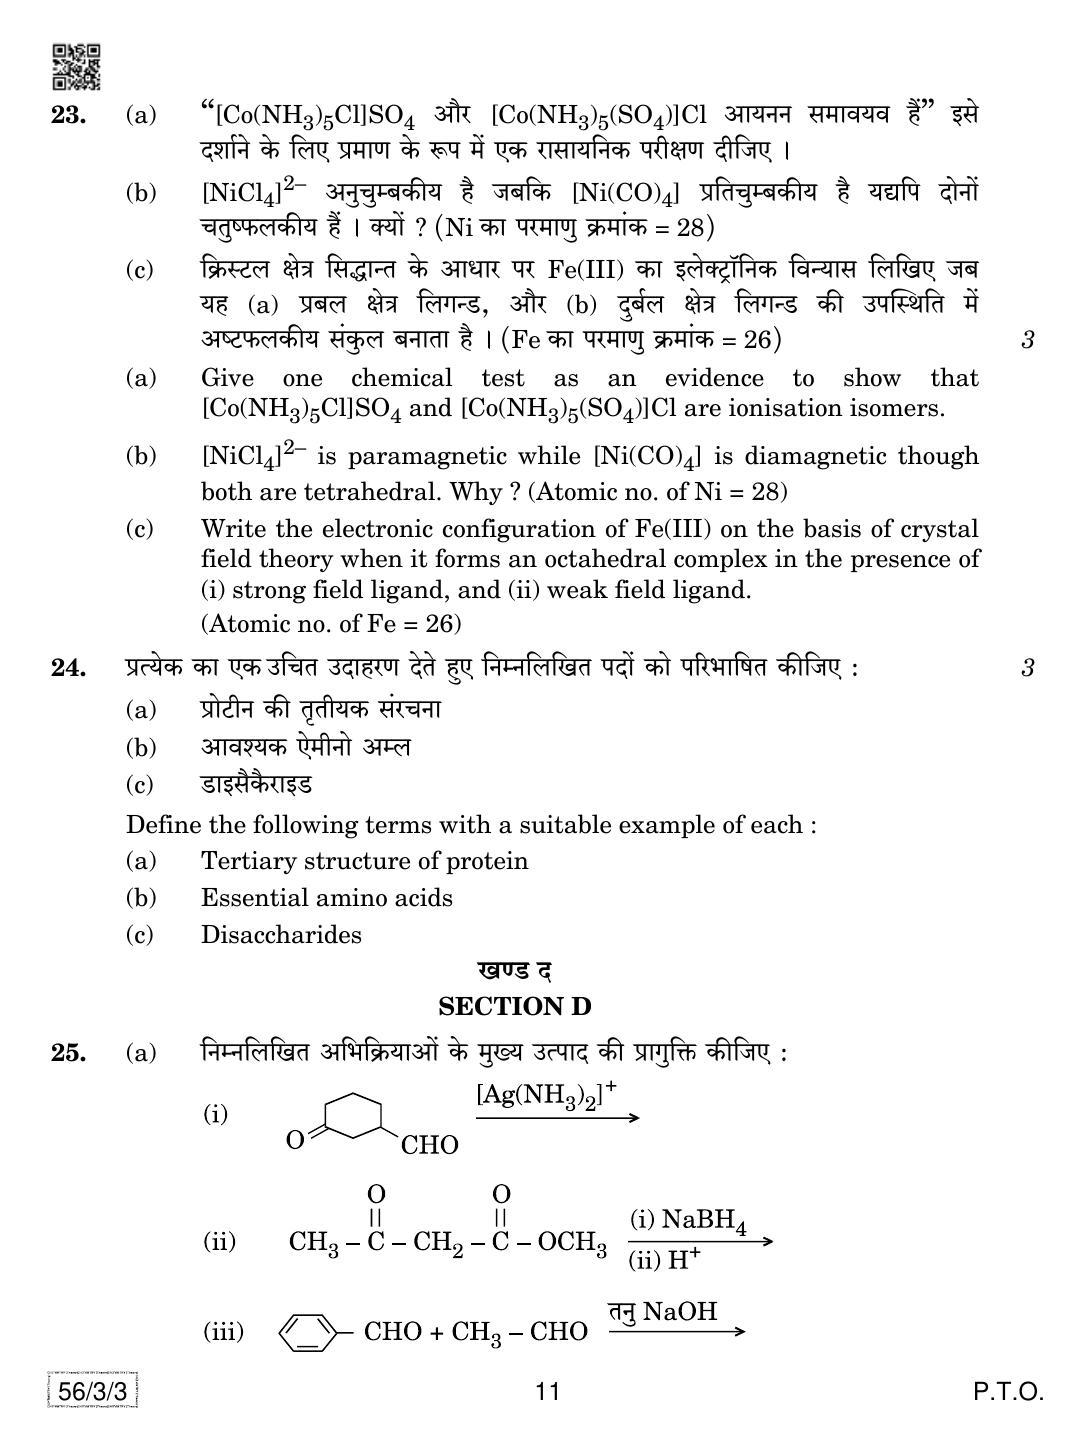 CBSE Class 12 56-3-3 Chemistry 2019 Question Paper - Page 11